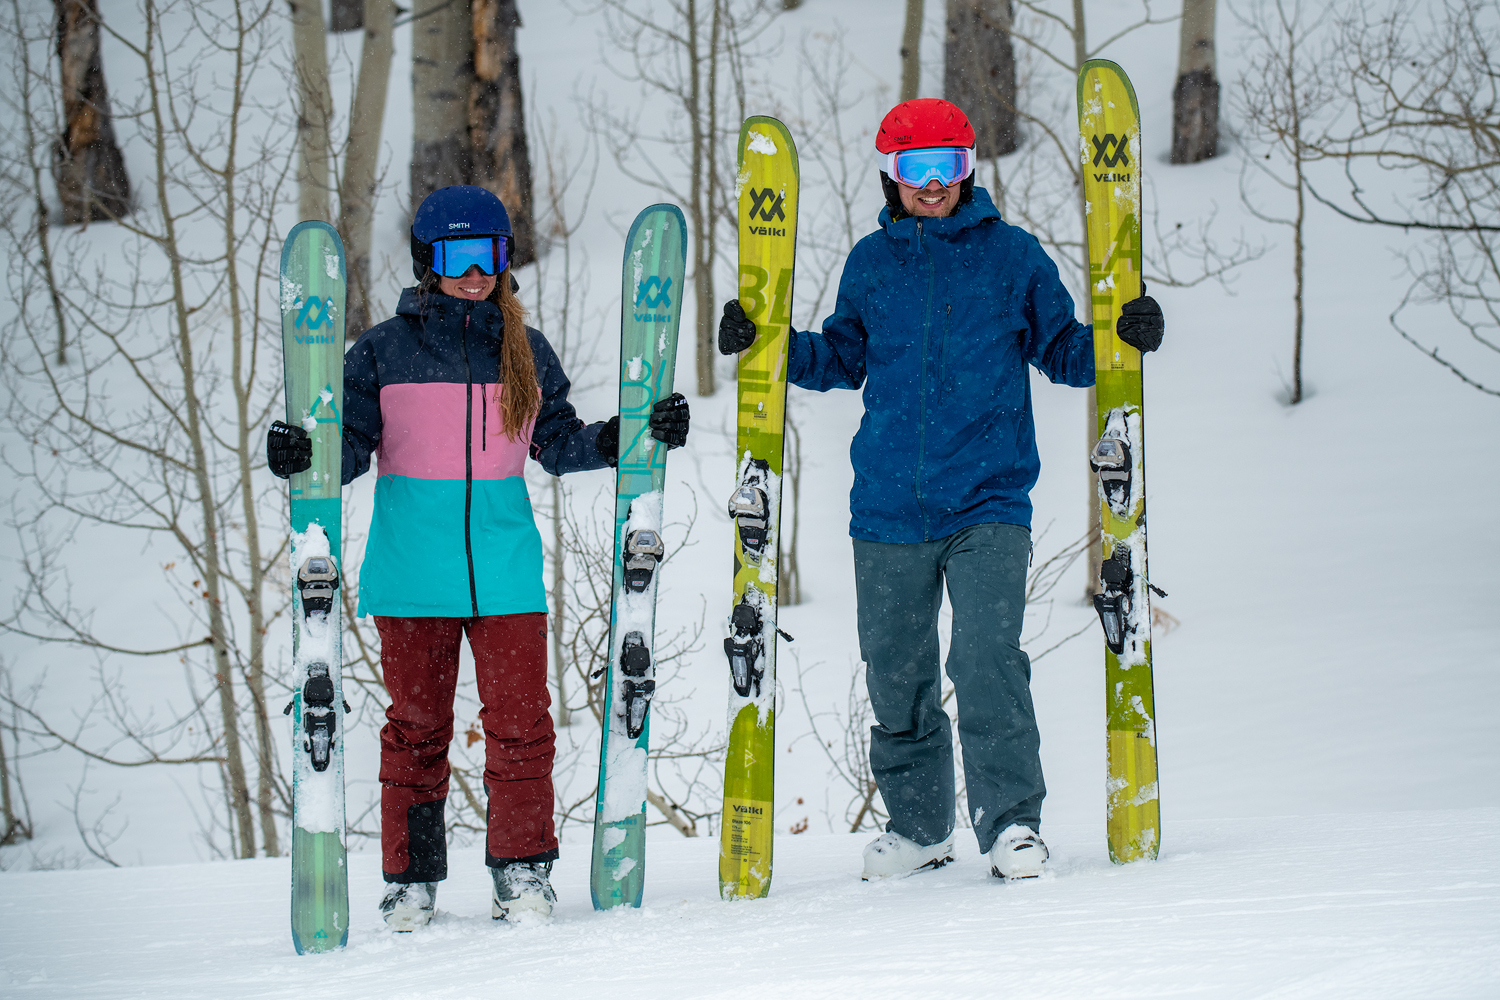 Women's all-montain skis (womens and unisex designs)